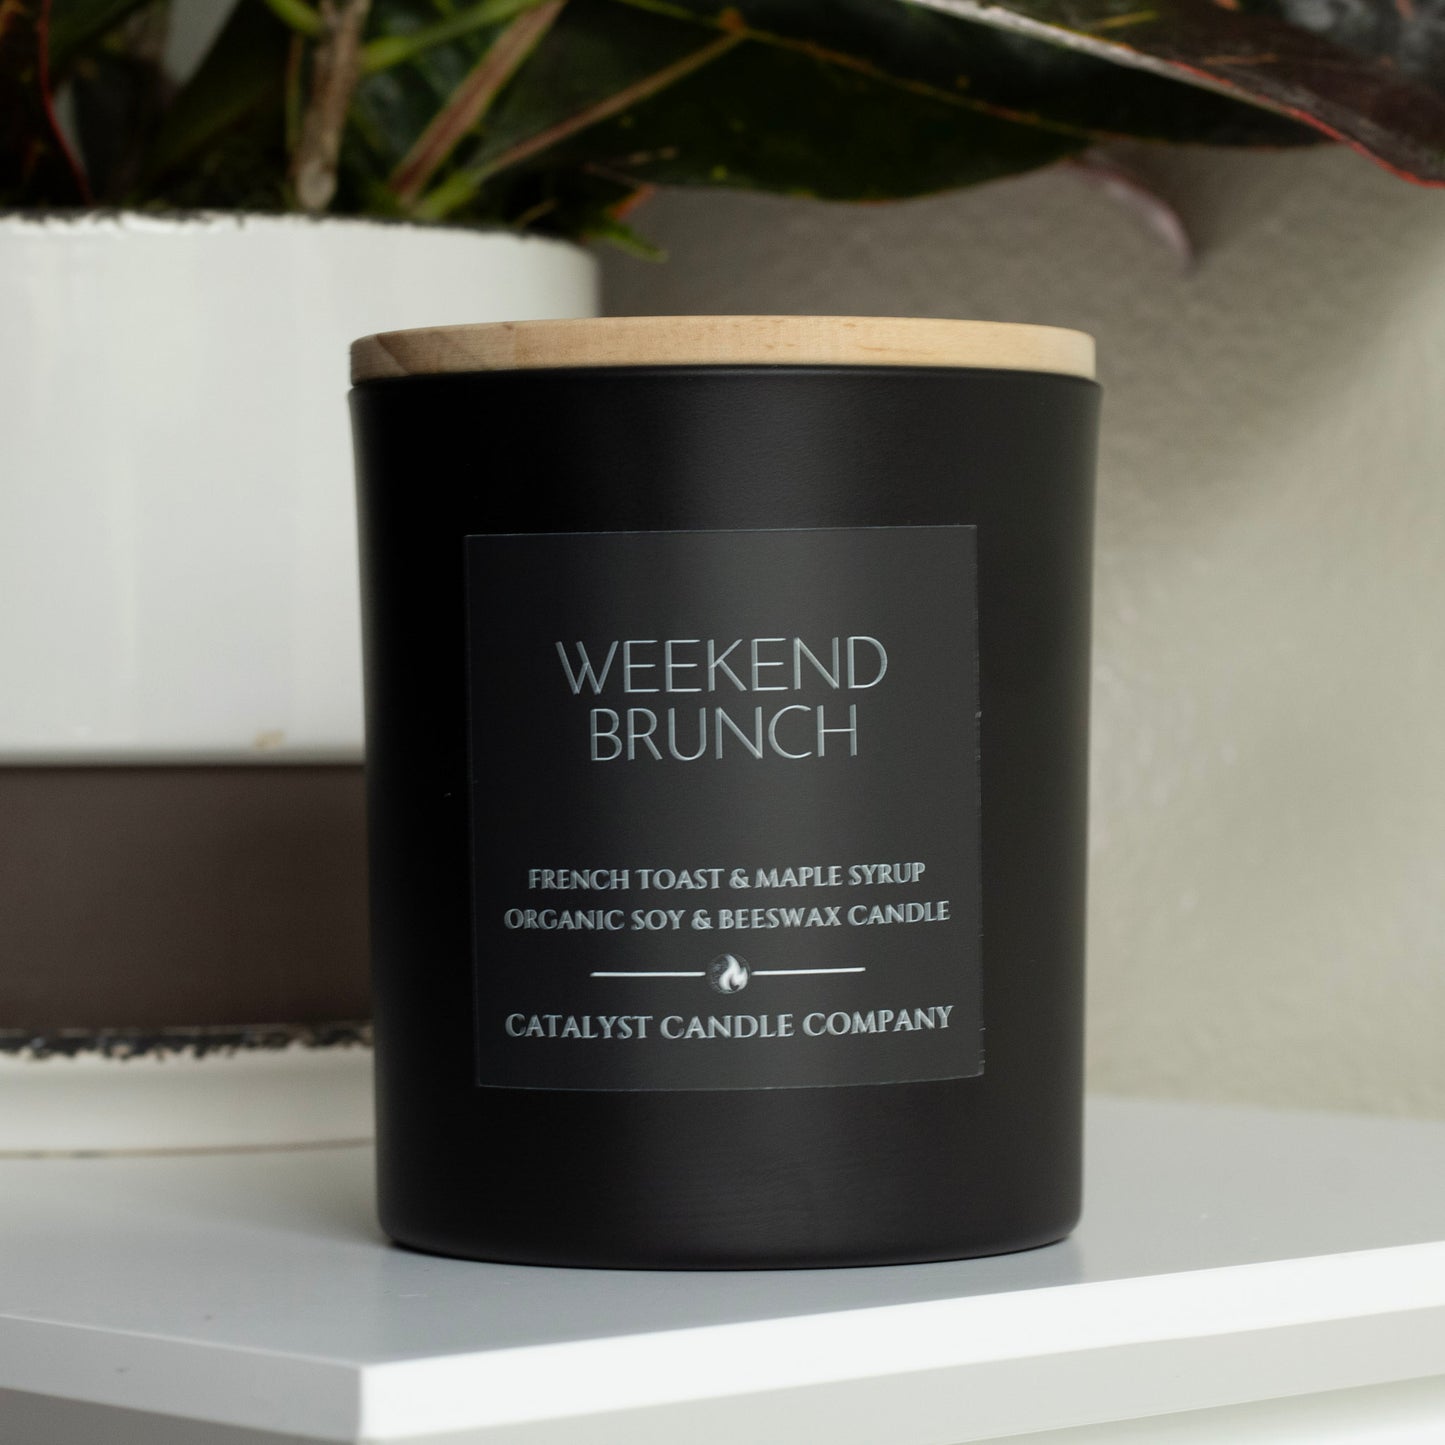 WEEKEND BRUNCH | French Toast & Maple Syrup Scented | Organic Soy & Beeswax Candle